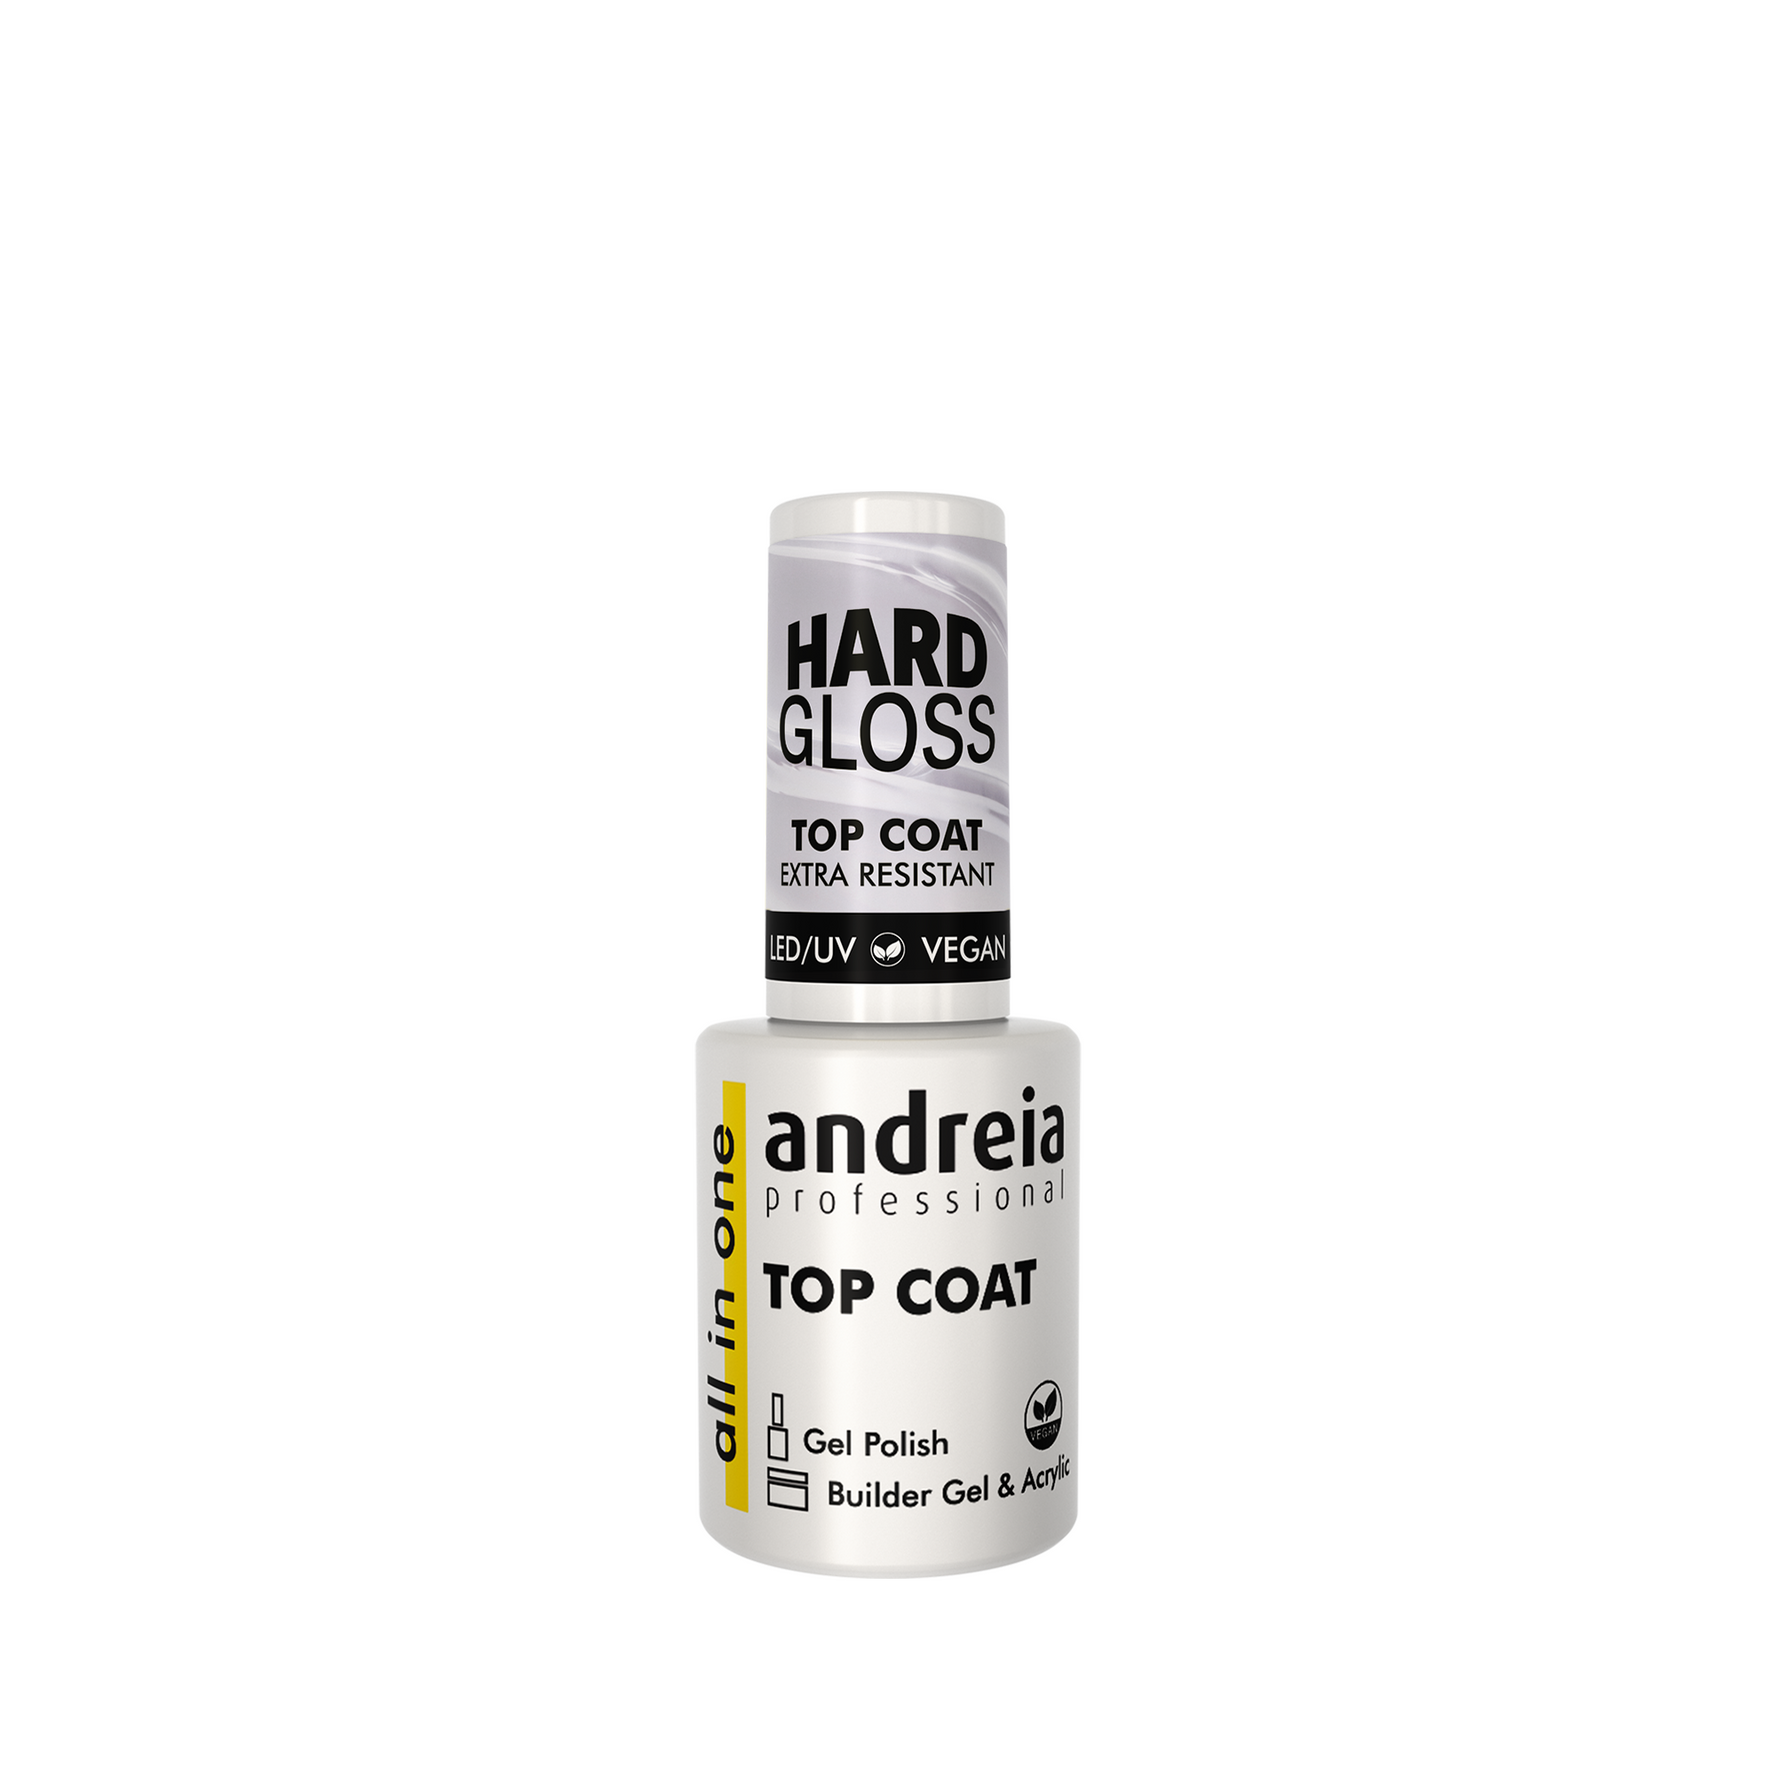 All In One Hard Gloss Top Coat - Extra Resistant